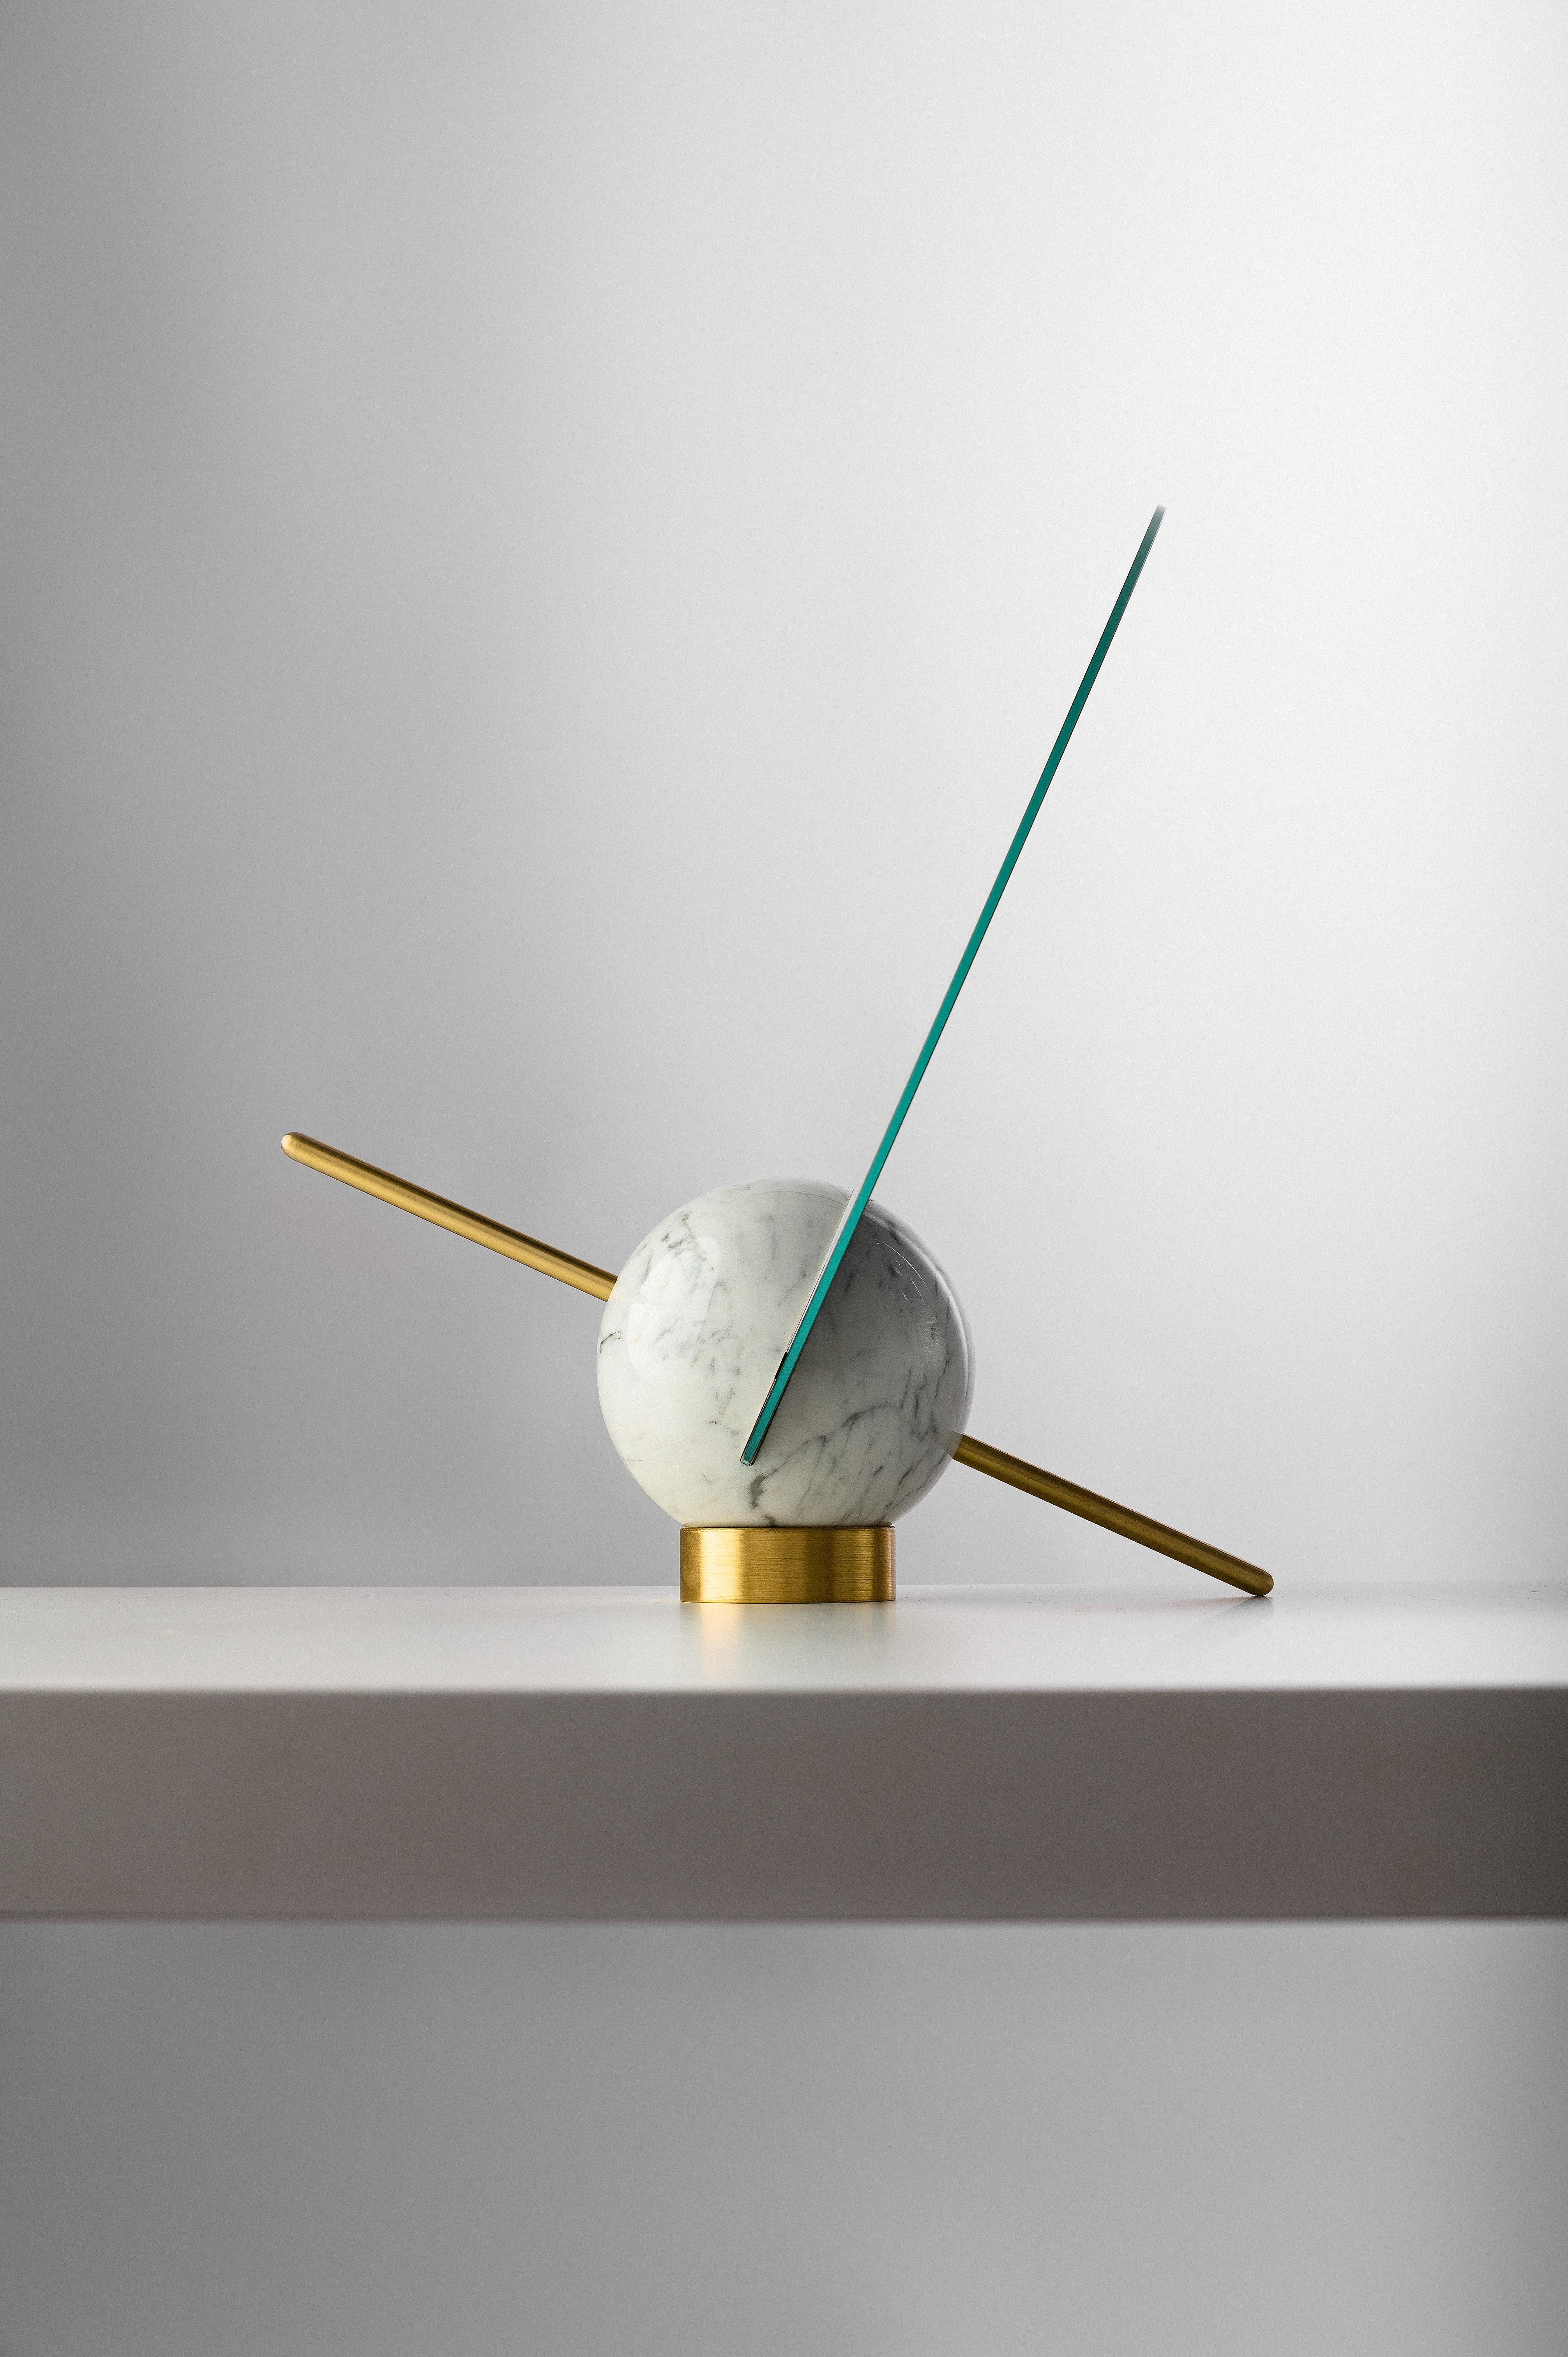 Gioco is a small standing mirror. 
It consists of a mirrored disk, a brass javelin and a round marble weight. Just as the art and skills of the participants are measured in different disciplines in The Games, Gioco proposes to challenge the